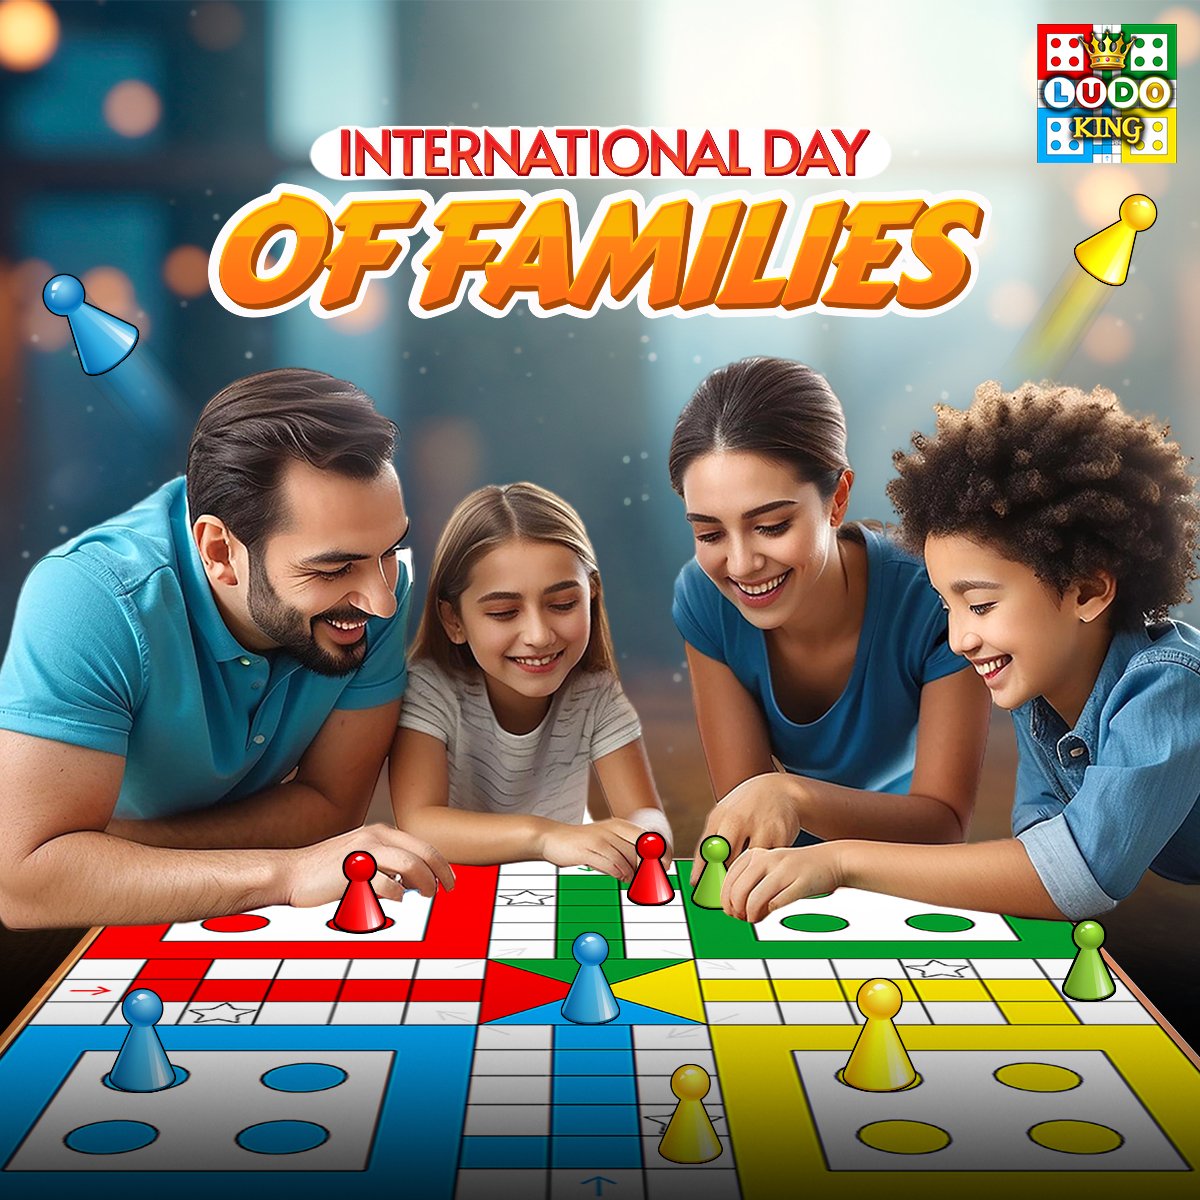 Bringing families closer this International Day of Families 👨‍👩‍👧‍👦 Roll the dice and let the fun begin! 🎲 📢Play with Family Now! ludokingnew.page.link/smm #InternationalDayOfFamilies #FamilyJoy #LudoKing #CelebrateFamily #boardgame #family